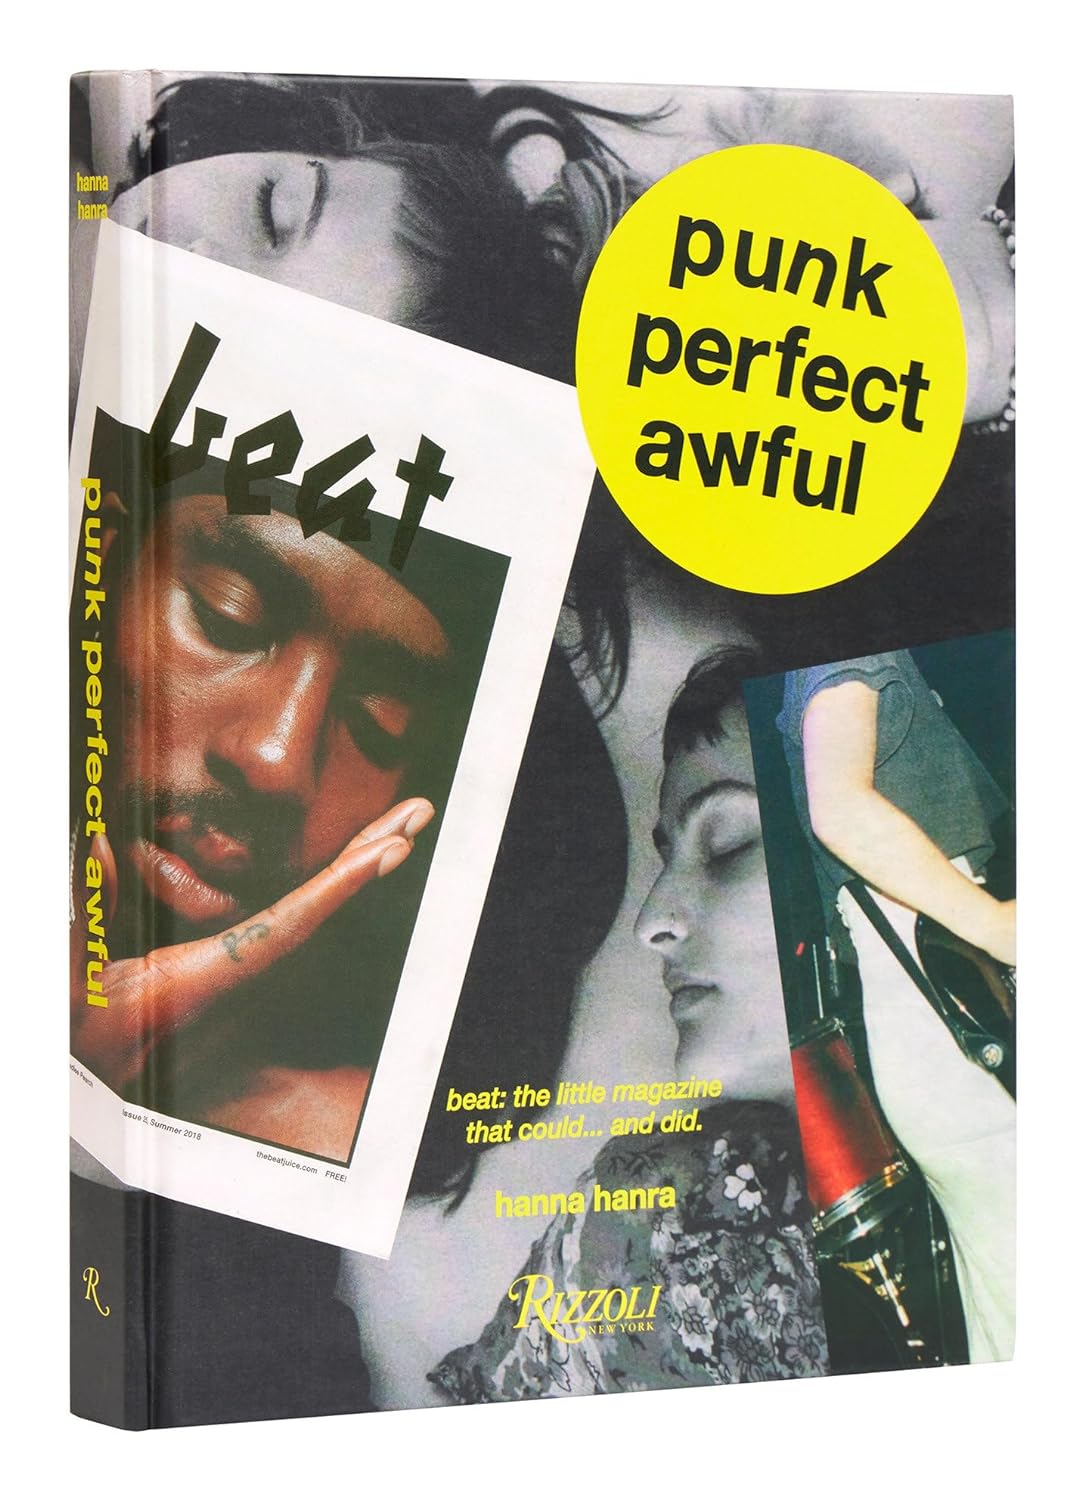 Punk Perfect Awful: Beat: The Little Magazine that Could ...and Did.